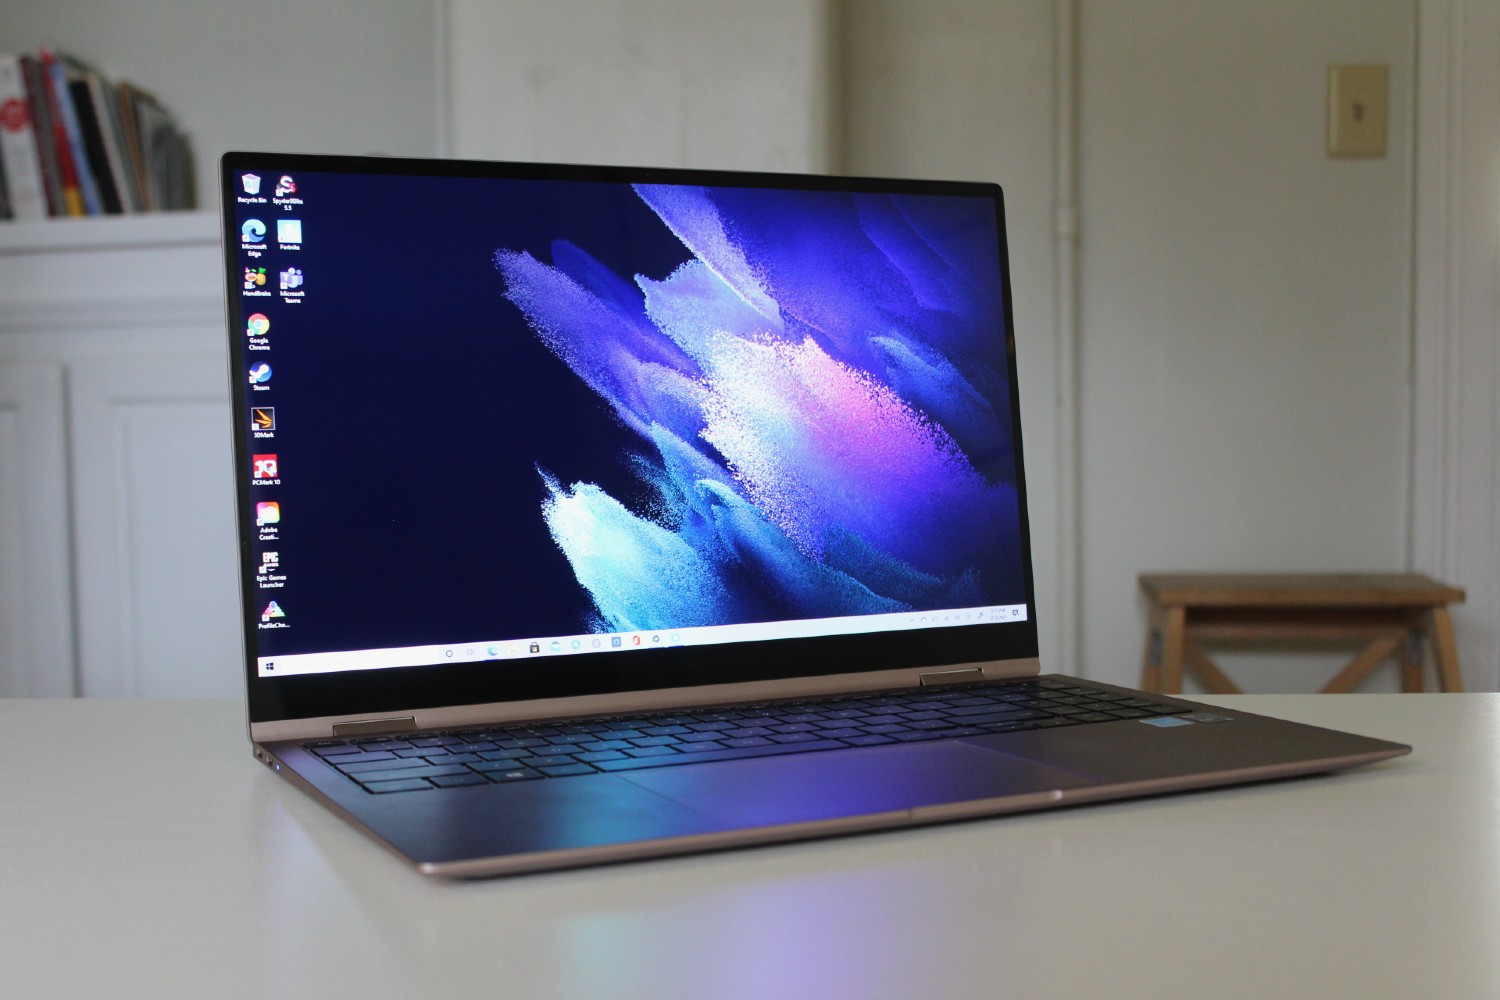 Samsung Galaxy book pro 360 review: The laptop-tablet hybrid with excellent  battery life